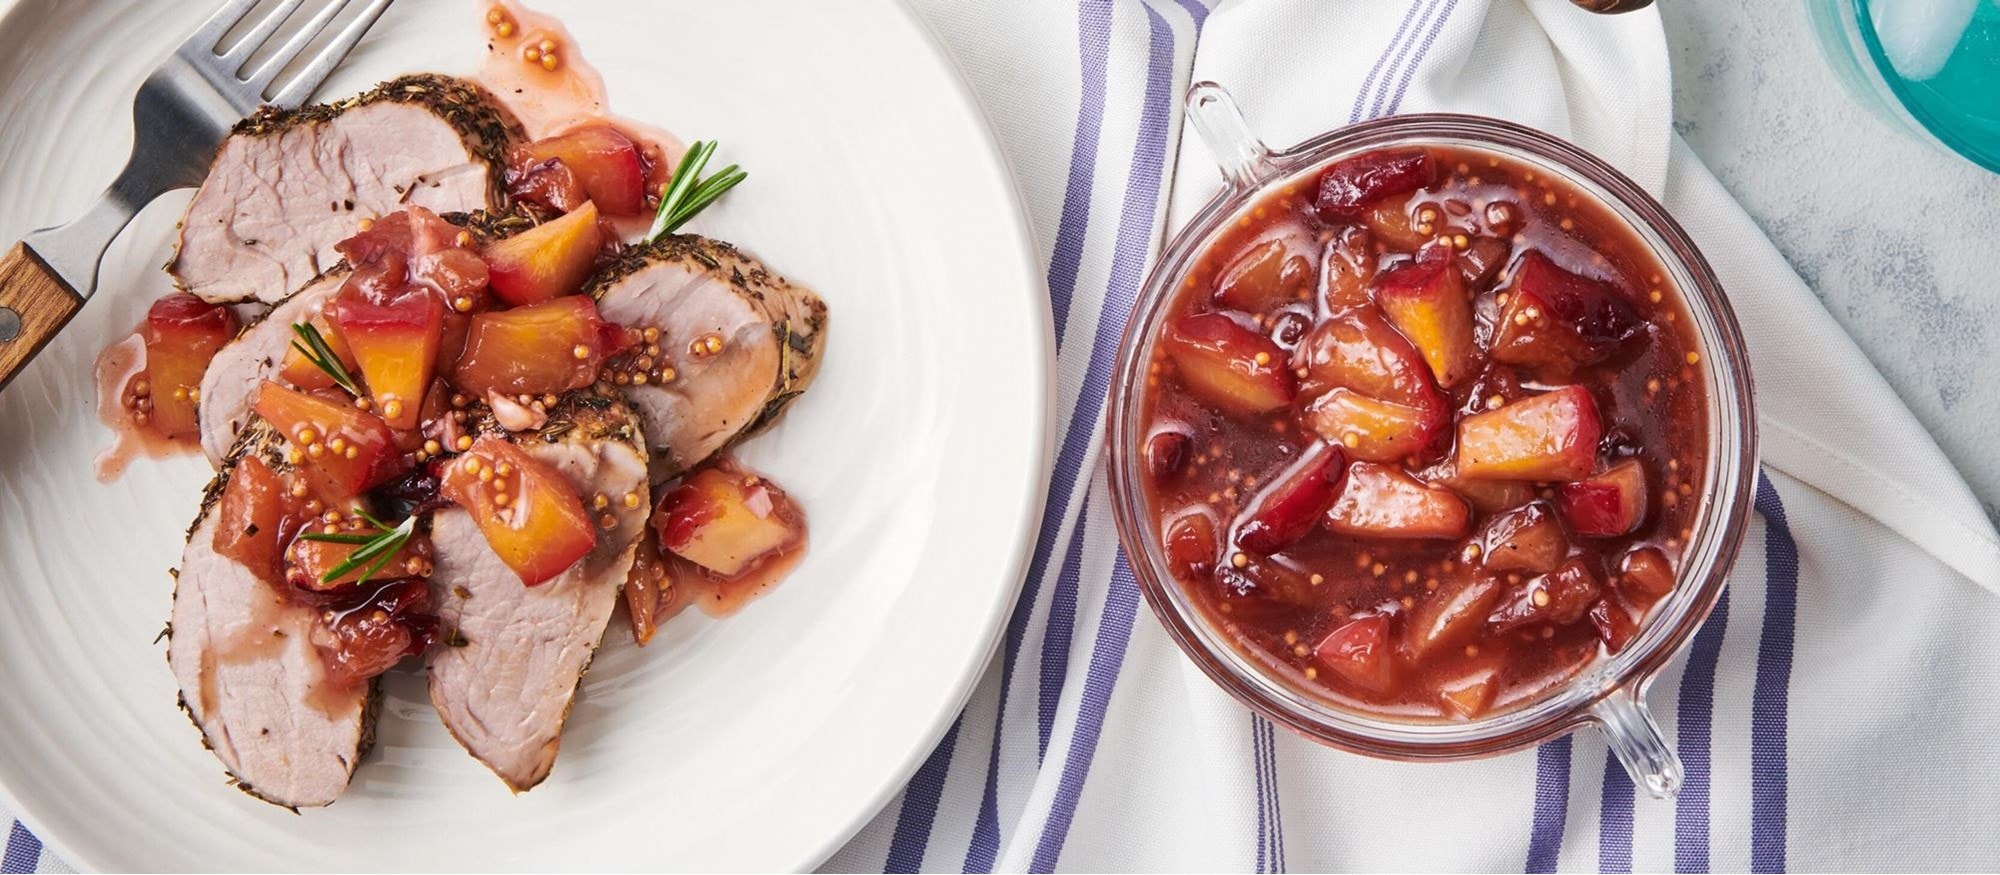 Easy and delicious Pork Tenderloin with Plum Chutney  recipe using the Convection Roast Mode setting of your Wolf Oven